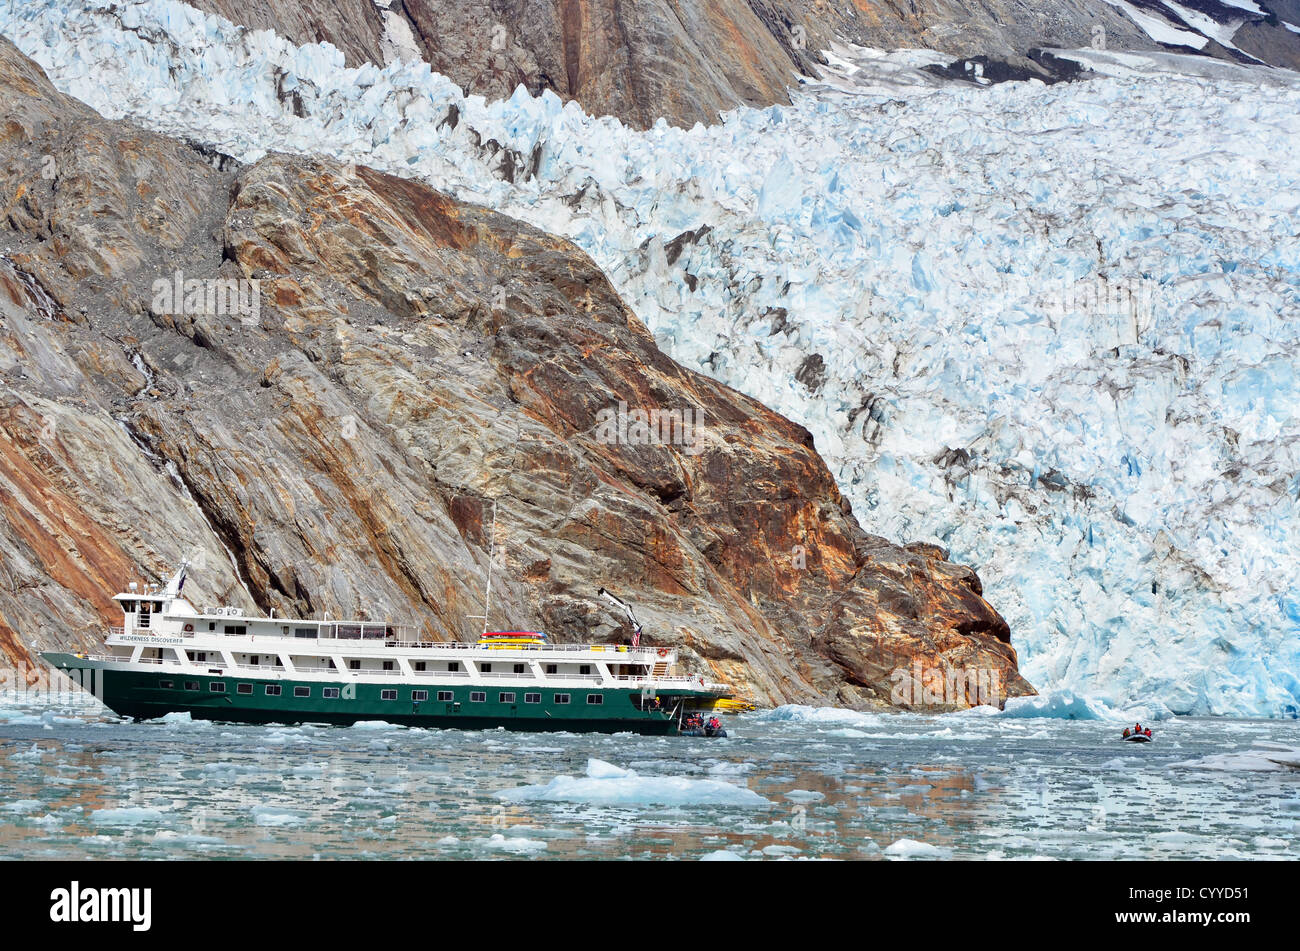 Cruise ship at the base of the North Sawyer Glacier in Alaska's Tongass National Forest. Stock Photo